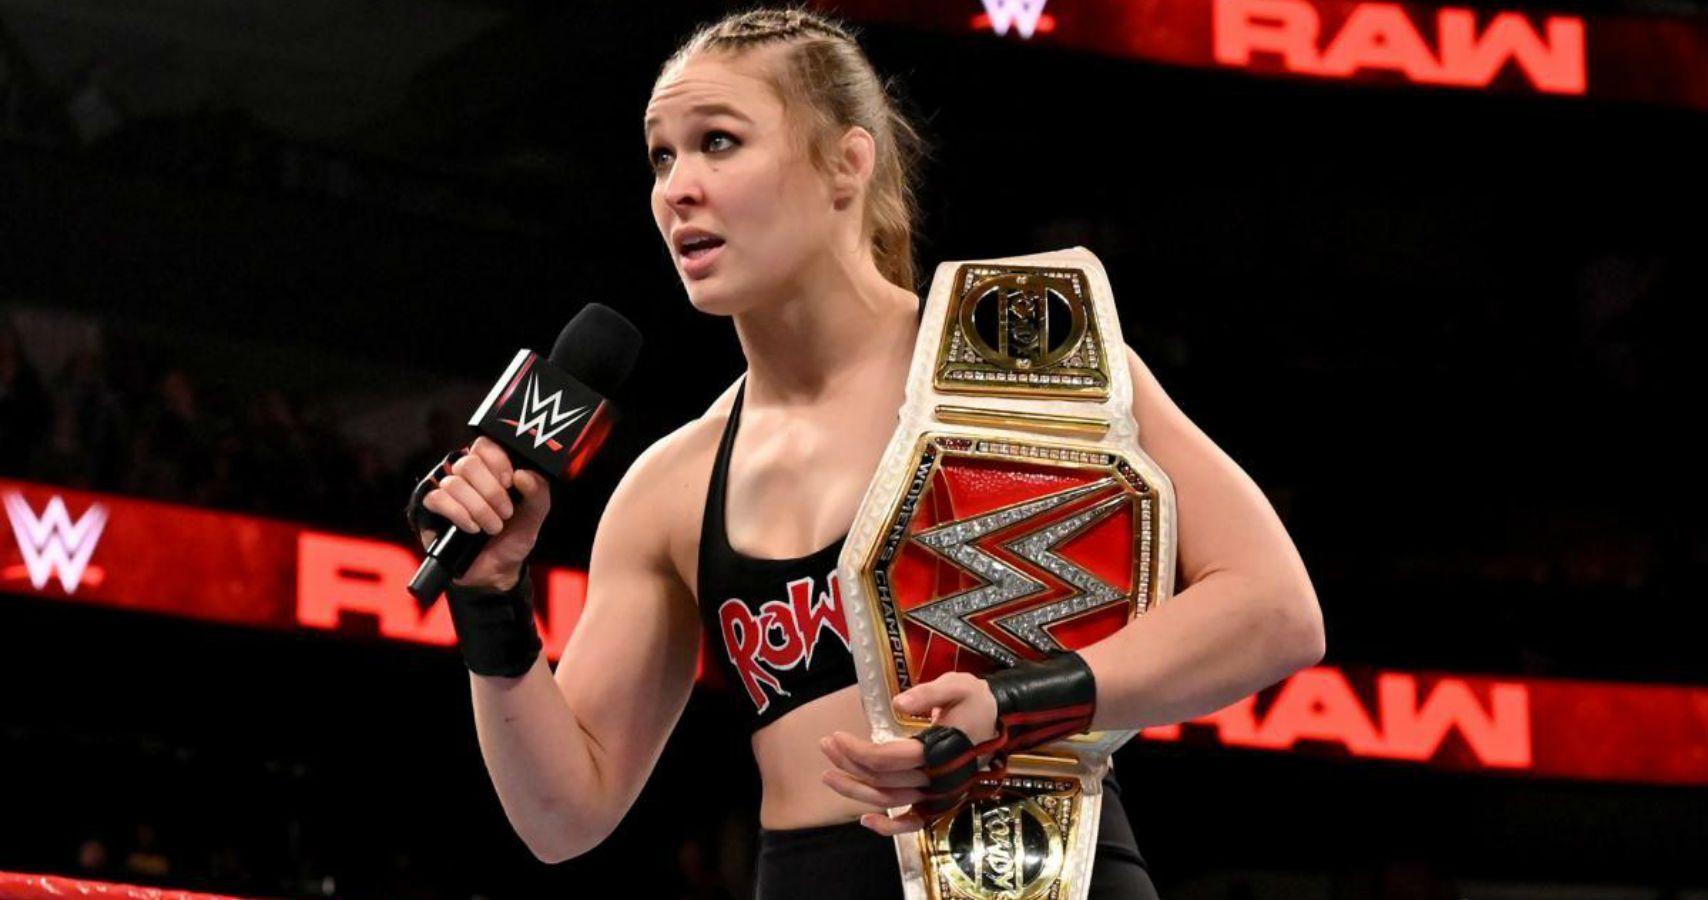 Ronda Rousey Is a WWE Main Eventer So Why Is She DLC in WWE 2K22